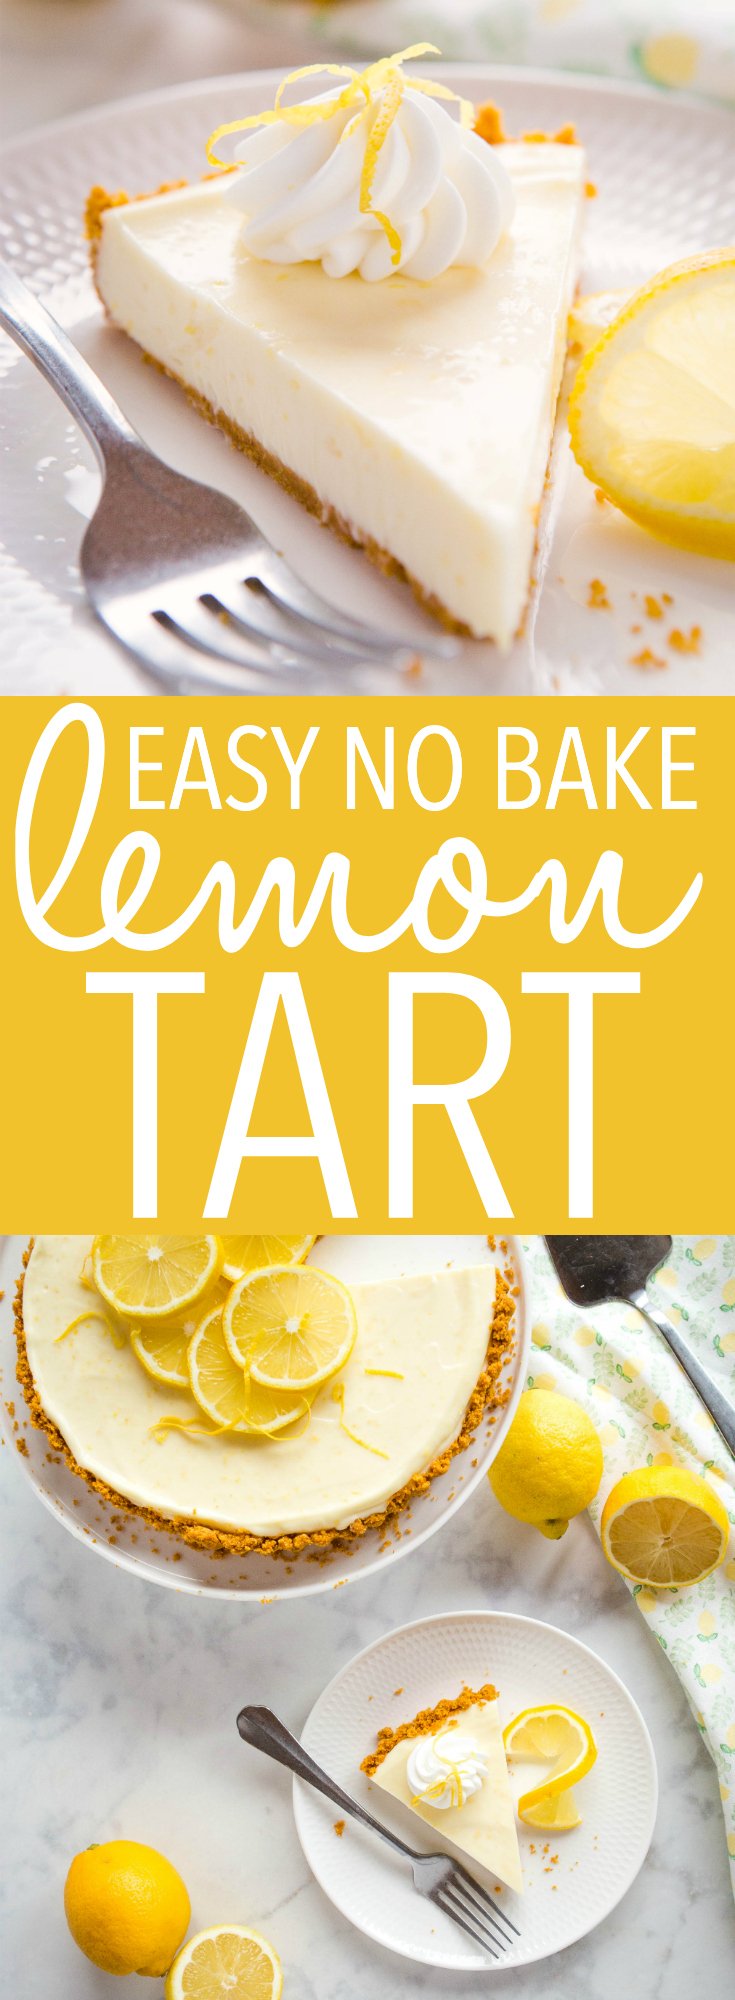 This Easy No Bake Lemon Tart is the perfect easy no-bake dessert for summer! The filling is only 3 ingredients and it's bursting with lemon flavour! Recipe from thebusybaker.ca! #lemon #tart #nobake #easydessert #dessert #lemondessert #pie via @busybakerblog